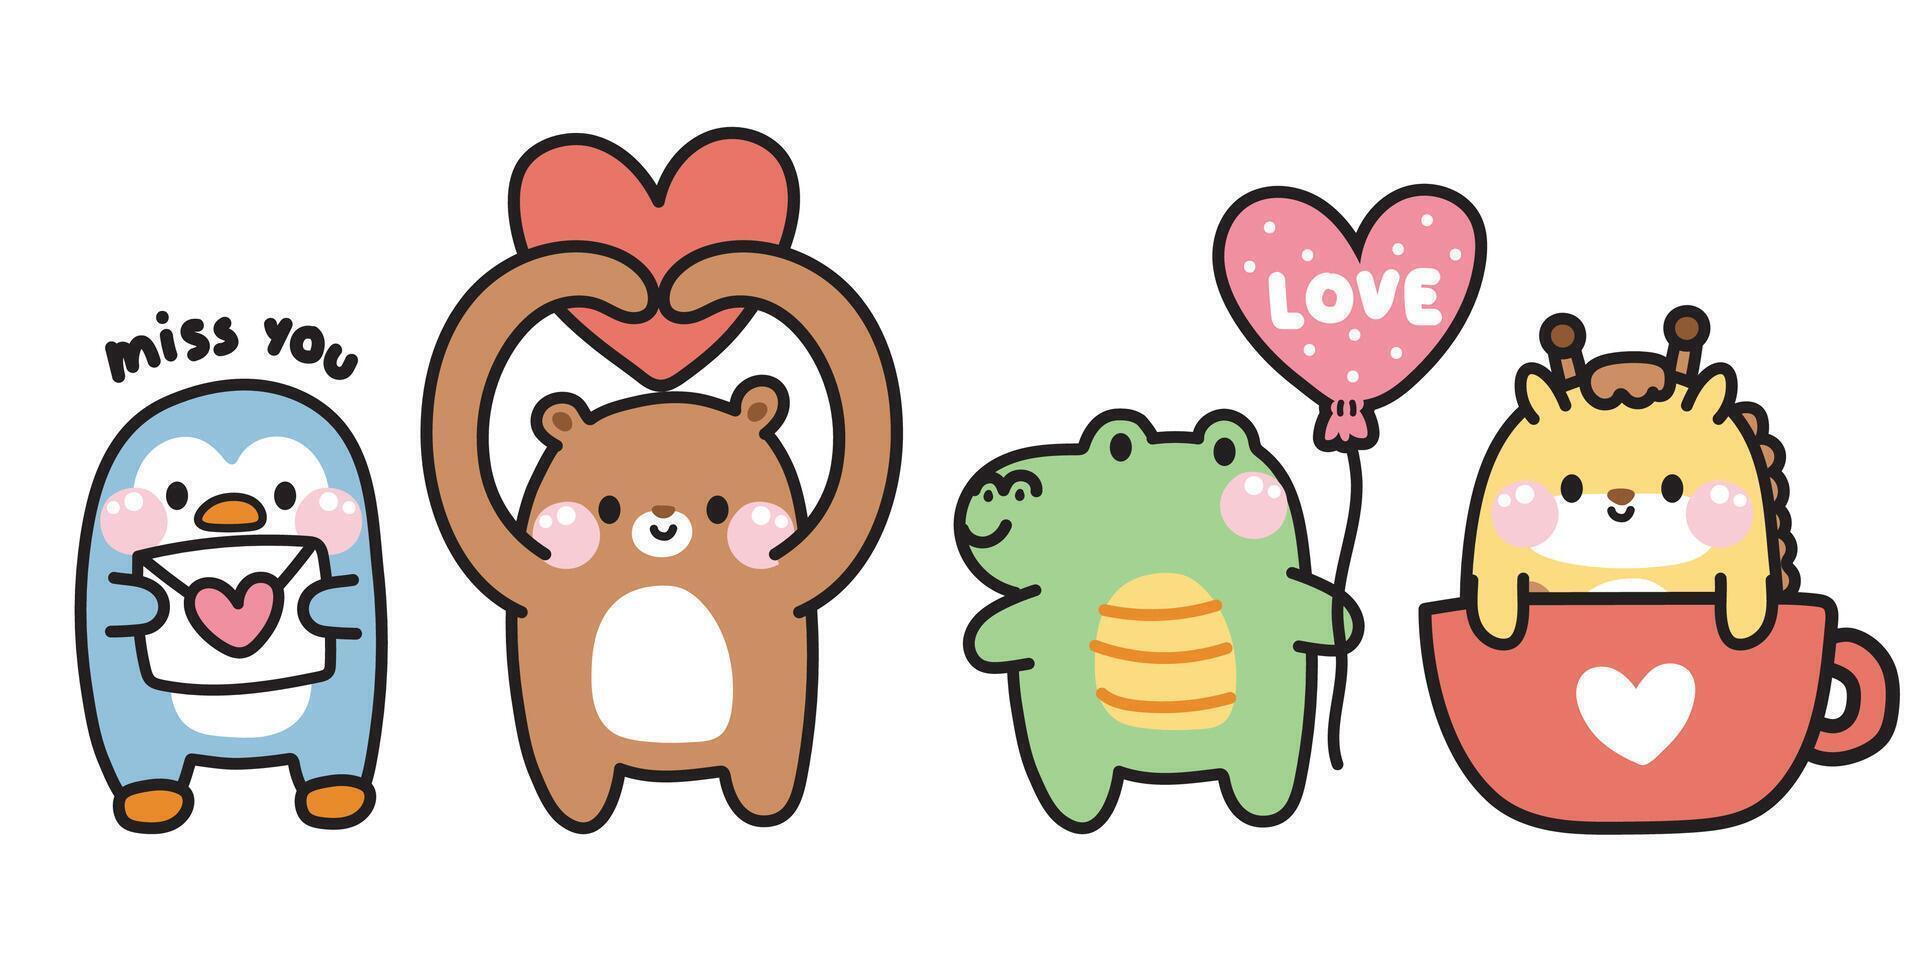 Valentines day.Set of cute animals with herat in various poses on white background.Penguin,teddy bear,crocodile,giraffe hand drawn.Love.Kawaii.Vector.Illustration. vector